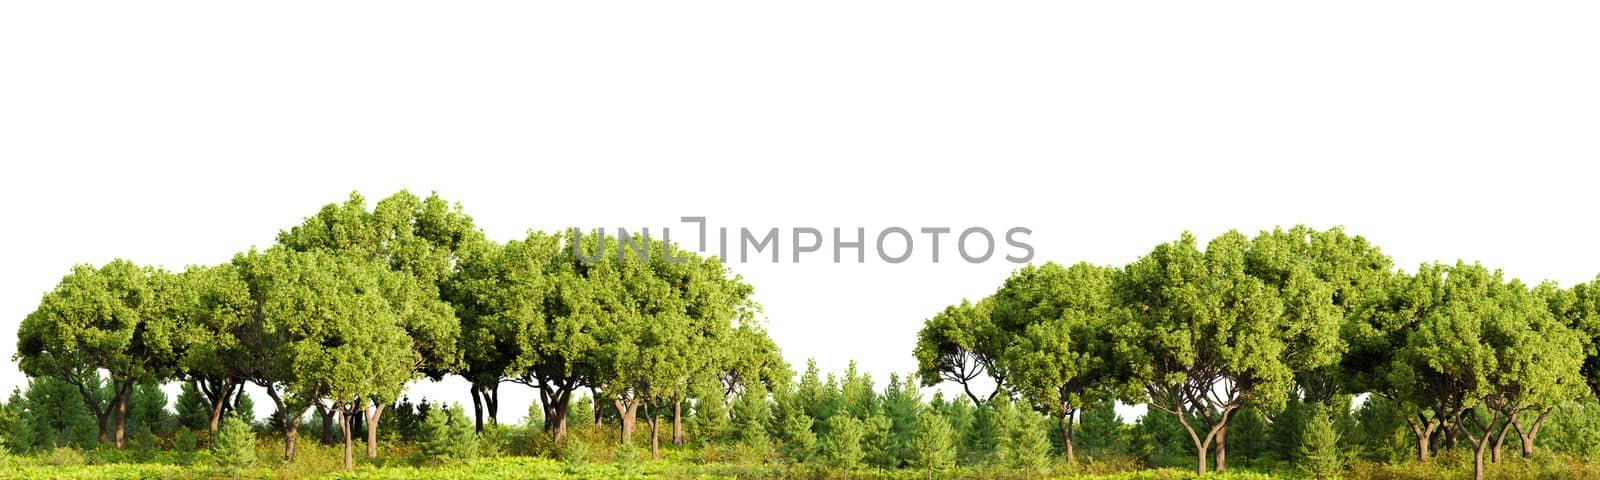 Row of trees in a grassy field on white transparent background. 3D rendering illustration.